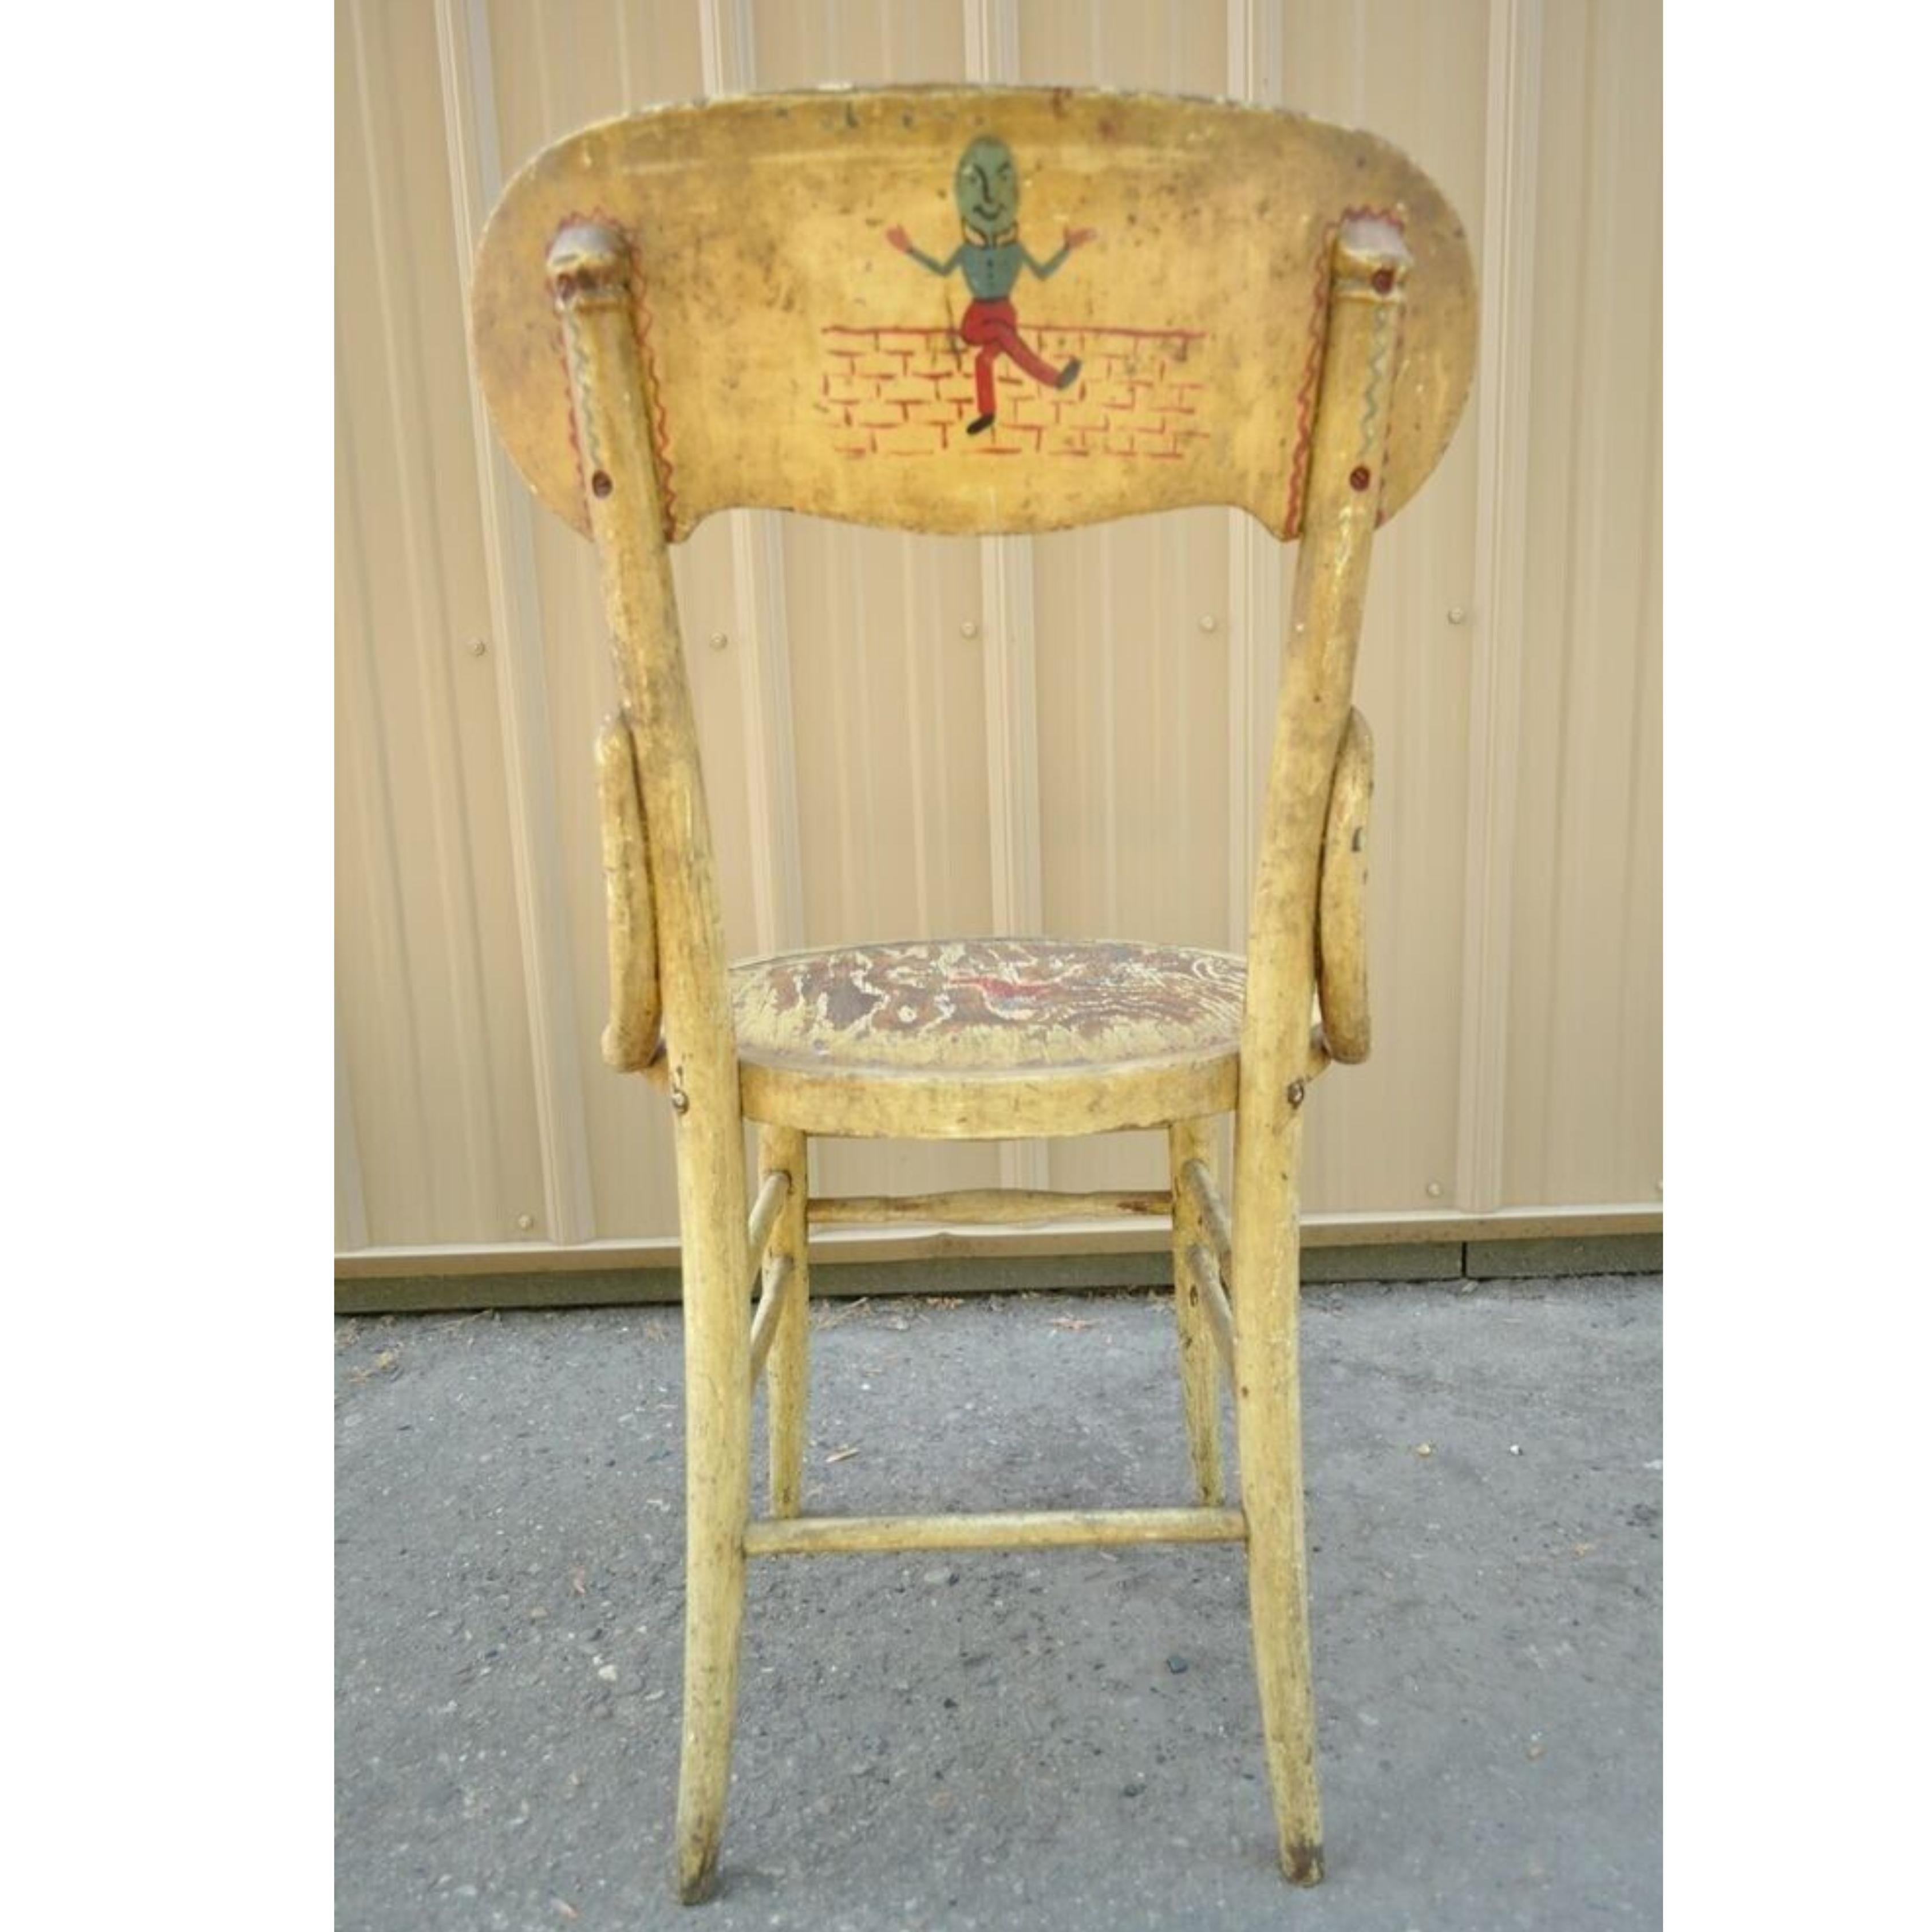 Antique Rustic Primitive Distress Hand Painted Nursery Rhymes Side Accent Chair For Sale 3